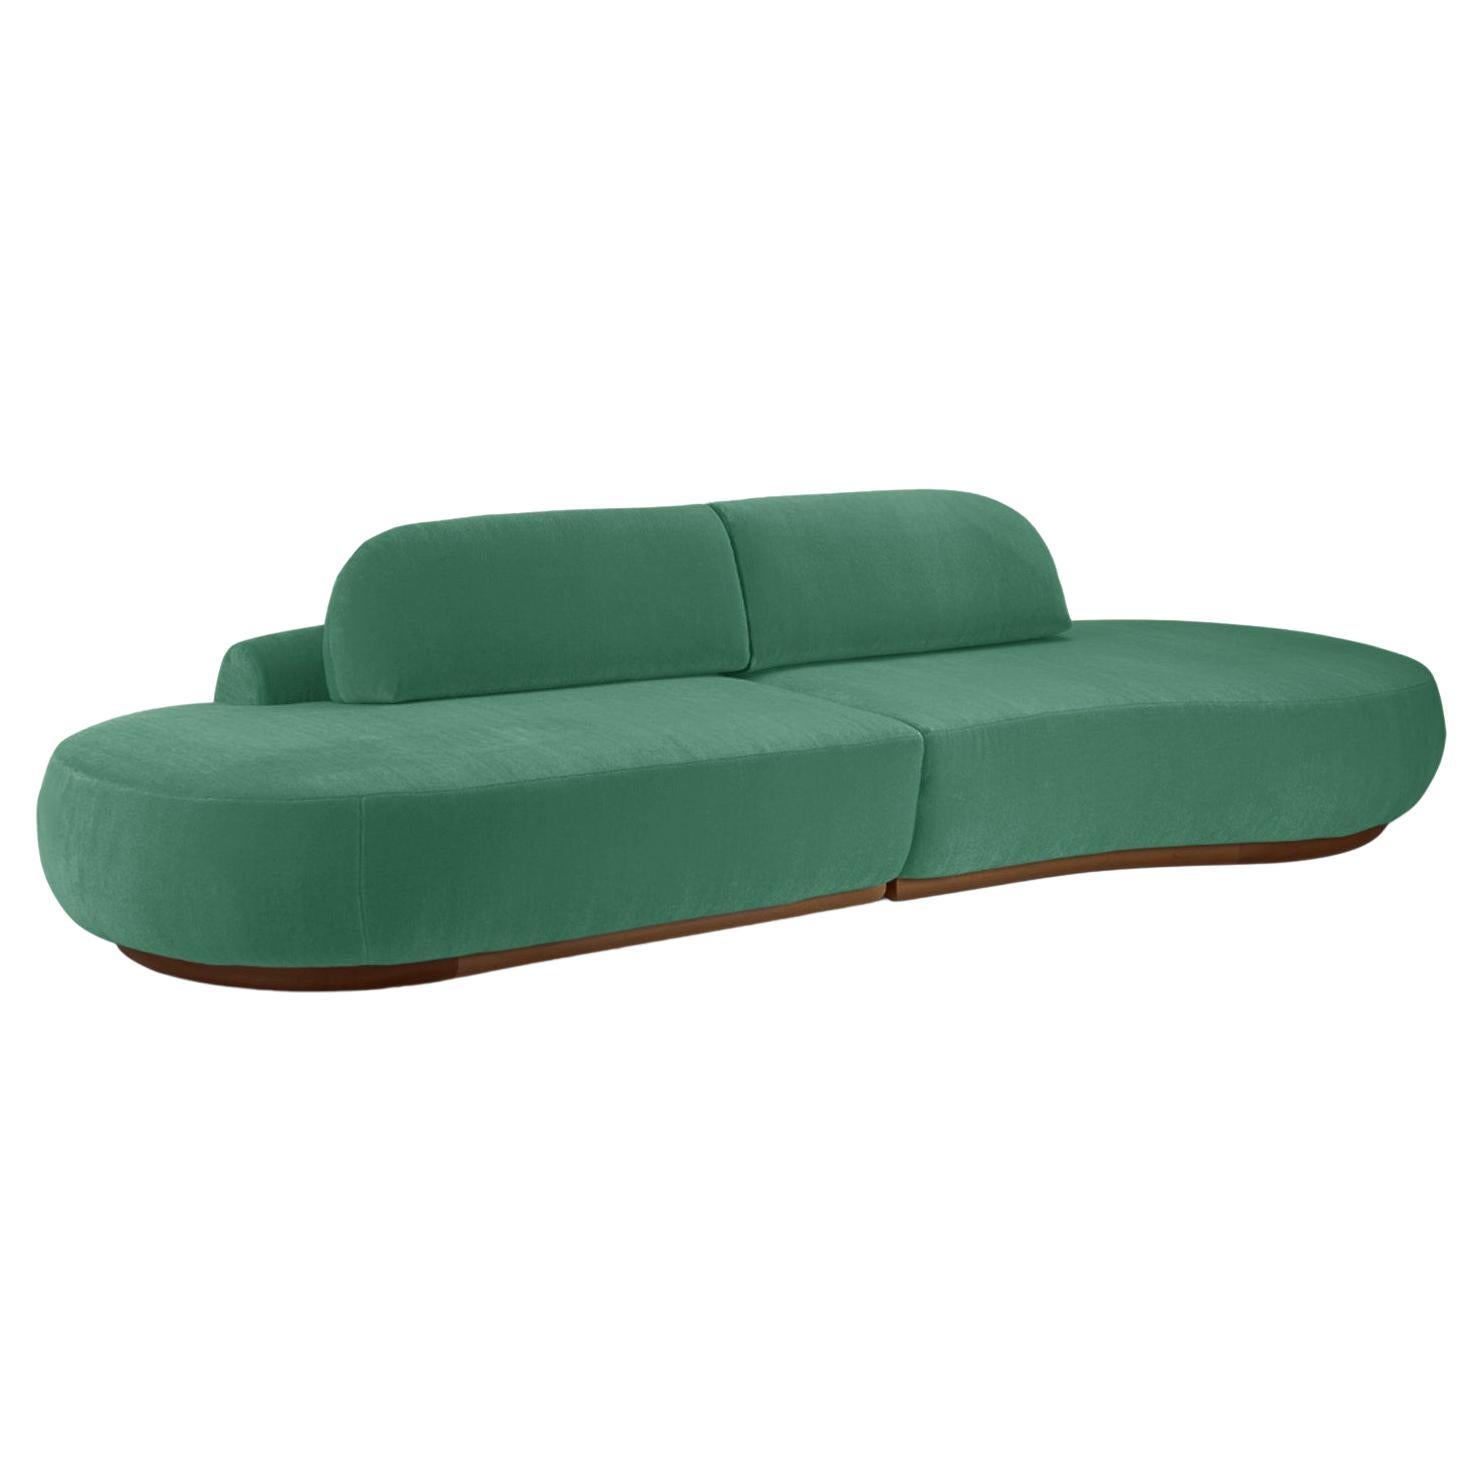 Naked Curved Sectional Sofa, 2 Piece with Beech Ash-056-1 and Paris Green For Sale